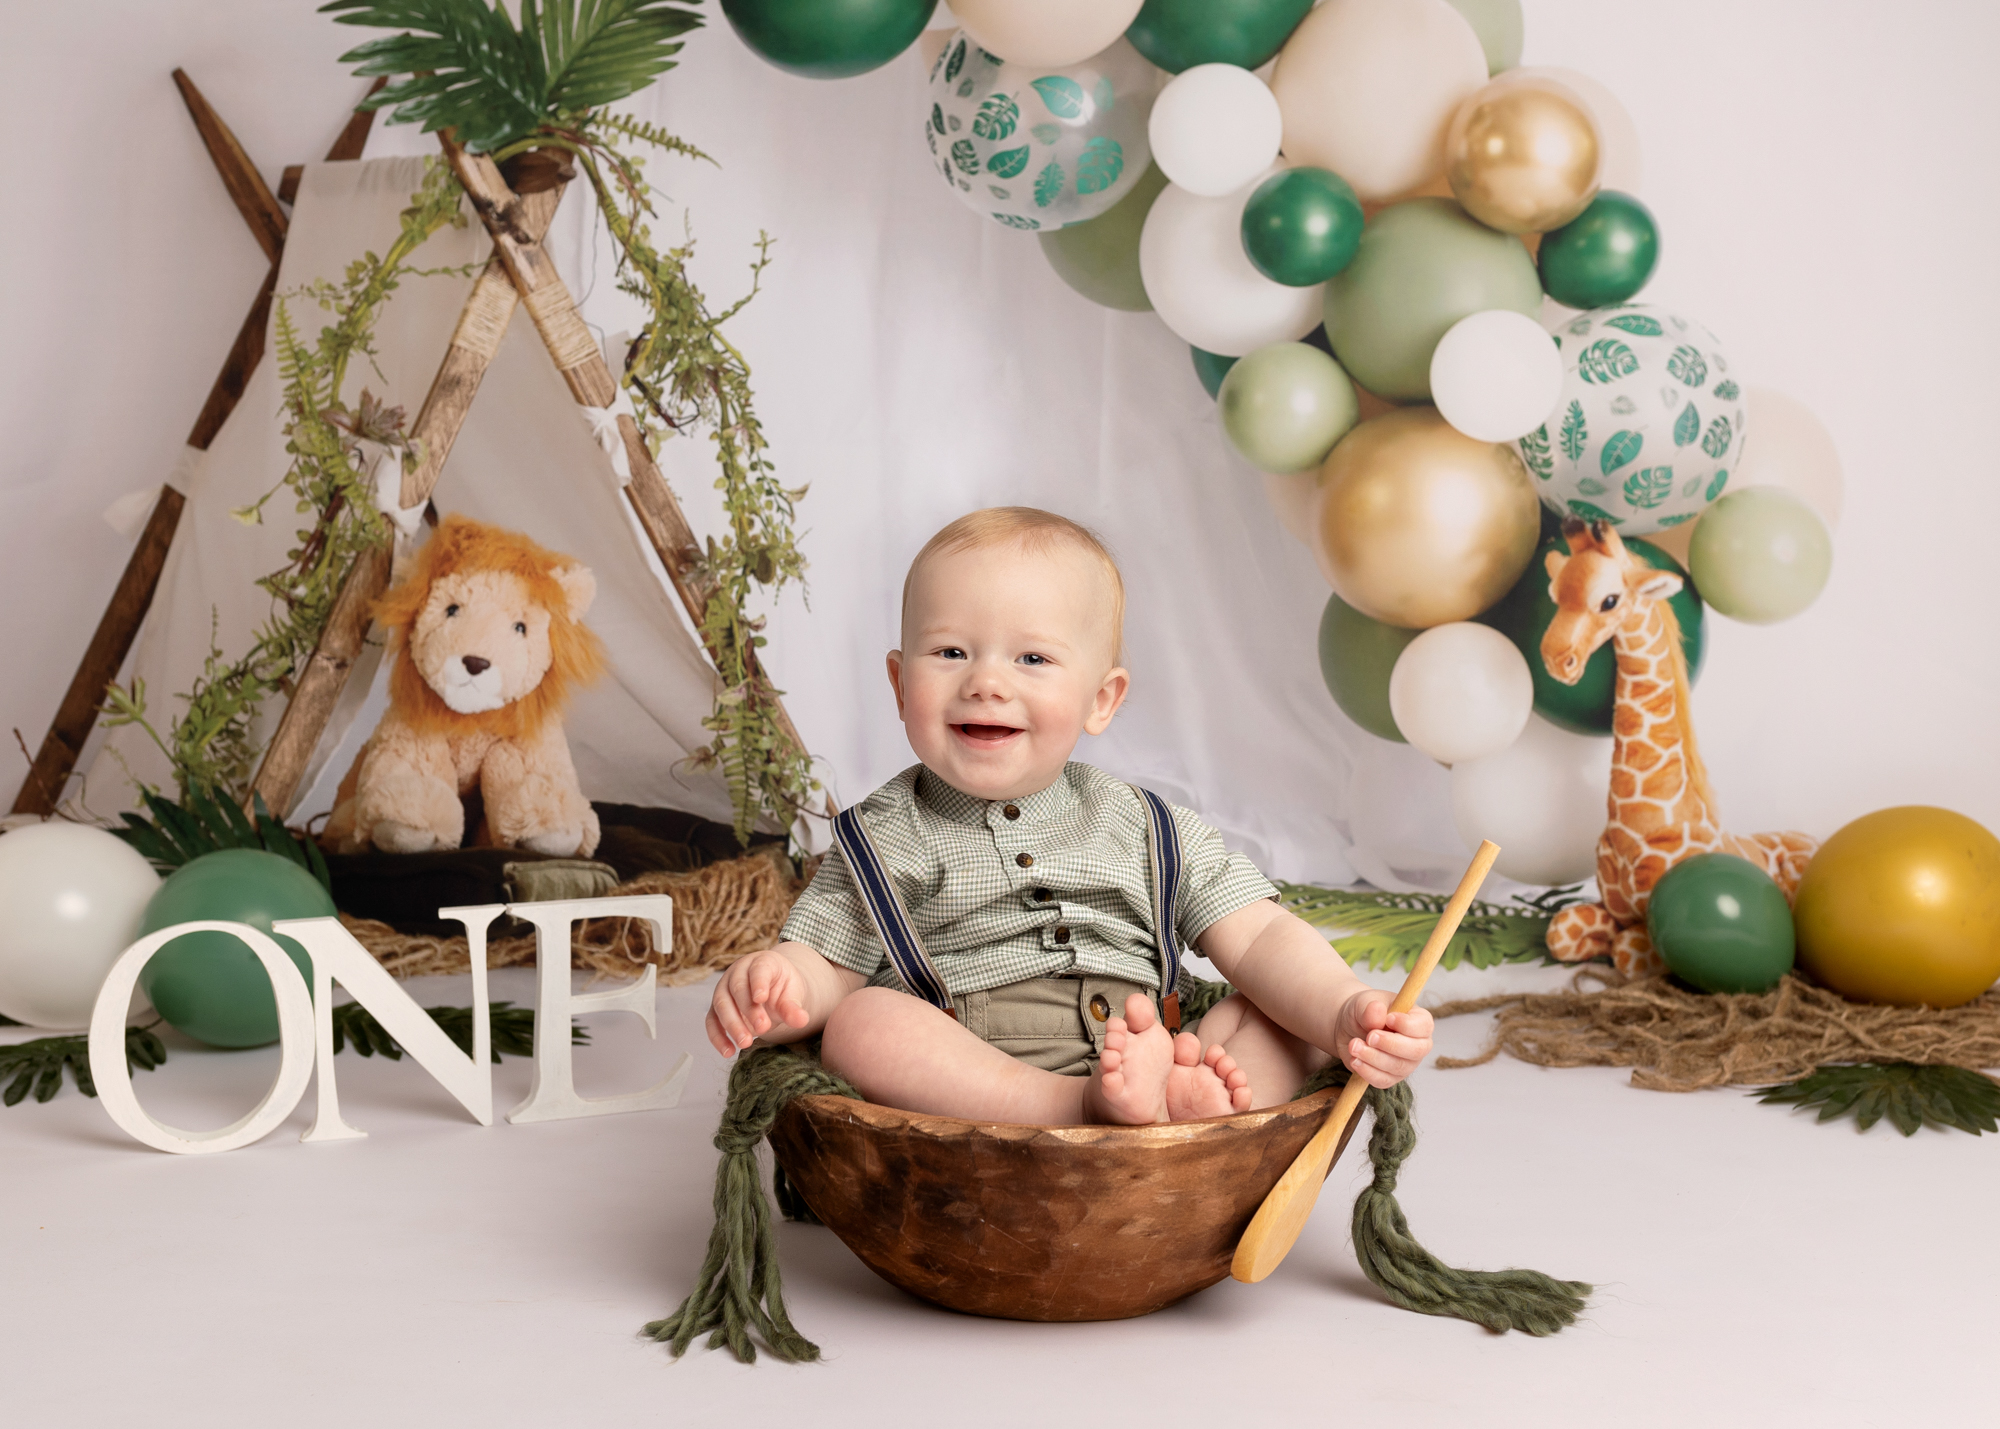 Baby boy sat in a bowl with a jungle theme backdrop during a cake smash photoshoot